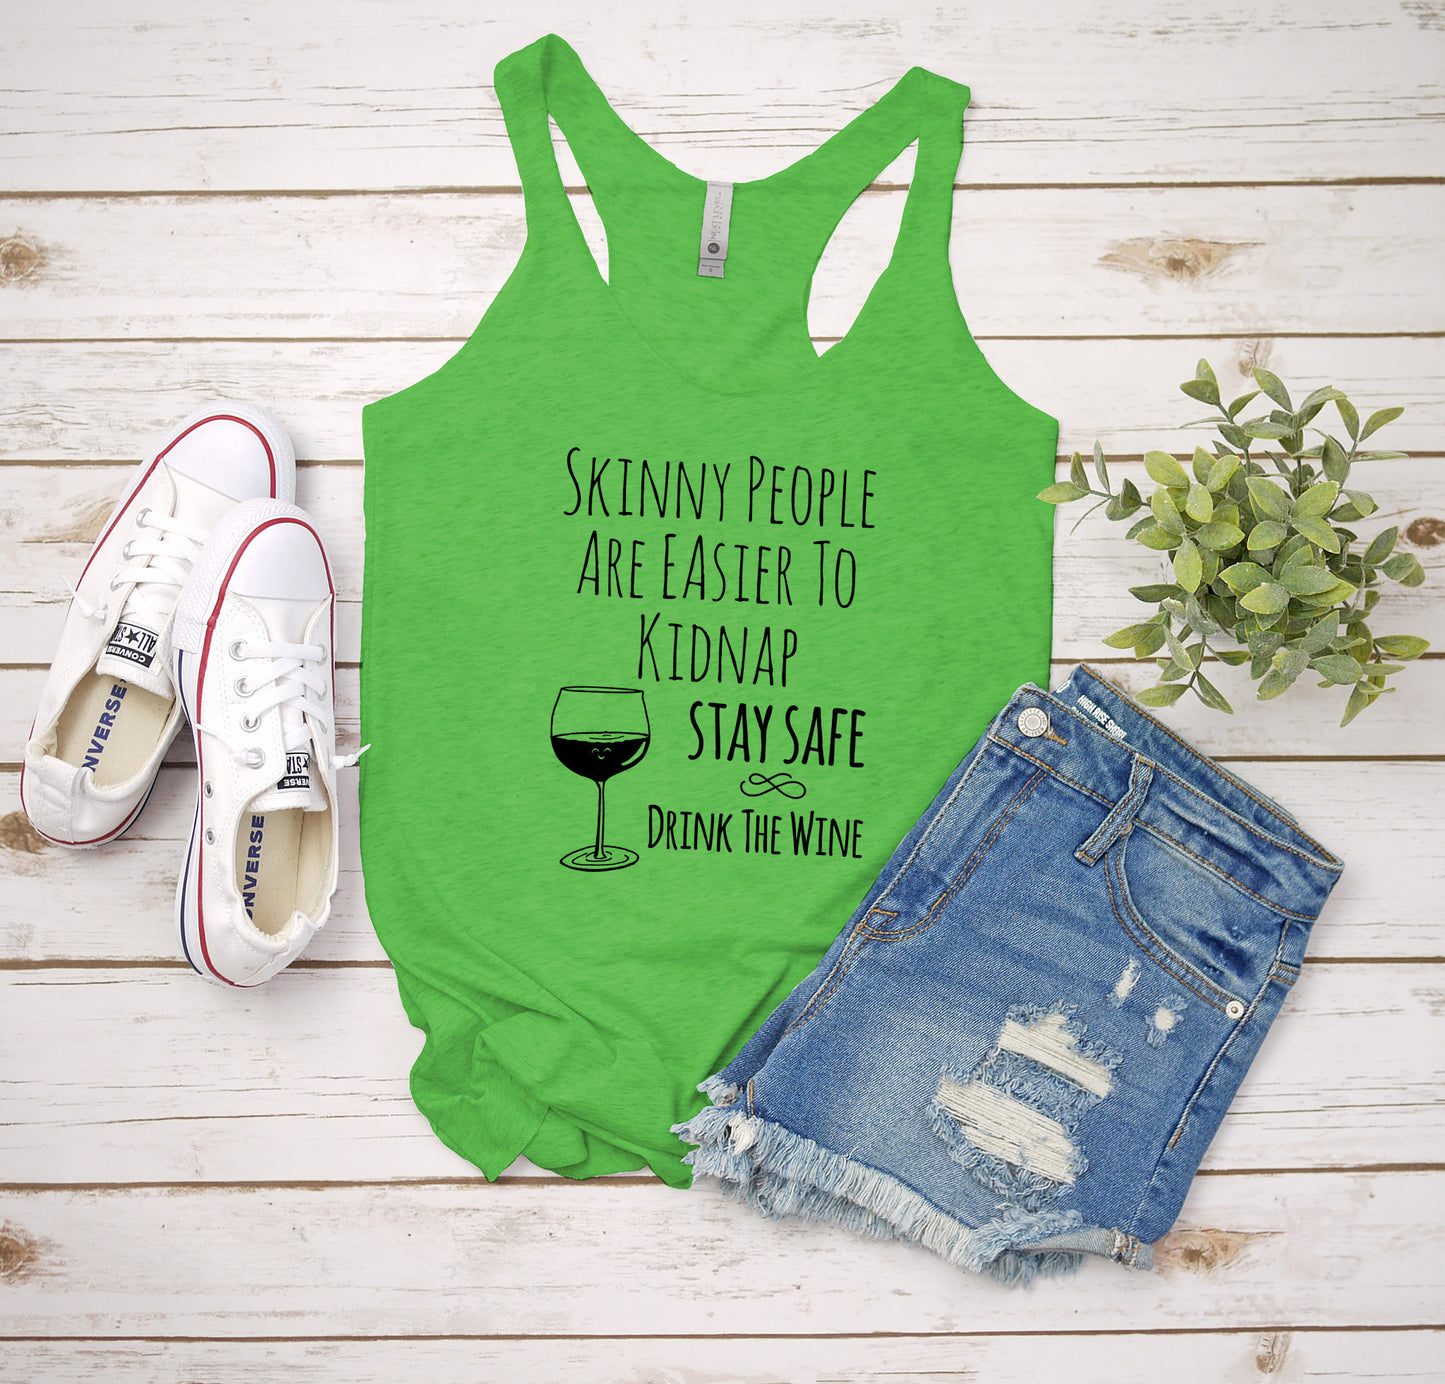 Skinny People Are Easier To Kidnap. Stay Safe. Drink The Wine - Women's Tank - Heather Gray, Tahiti, or Envy